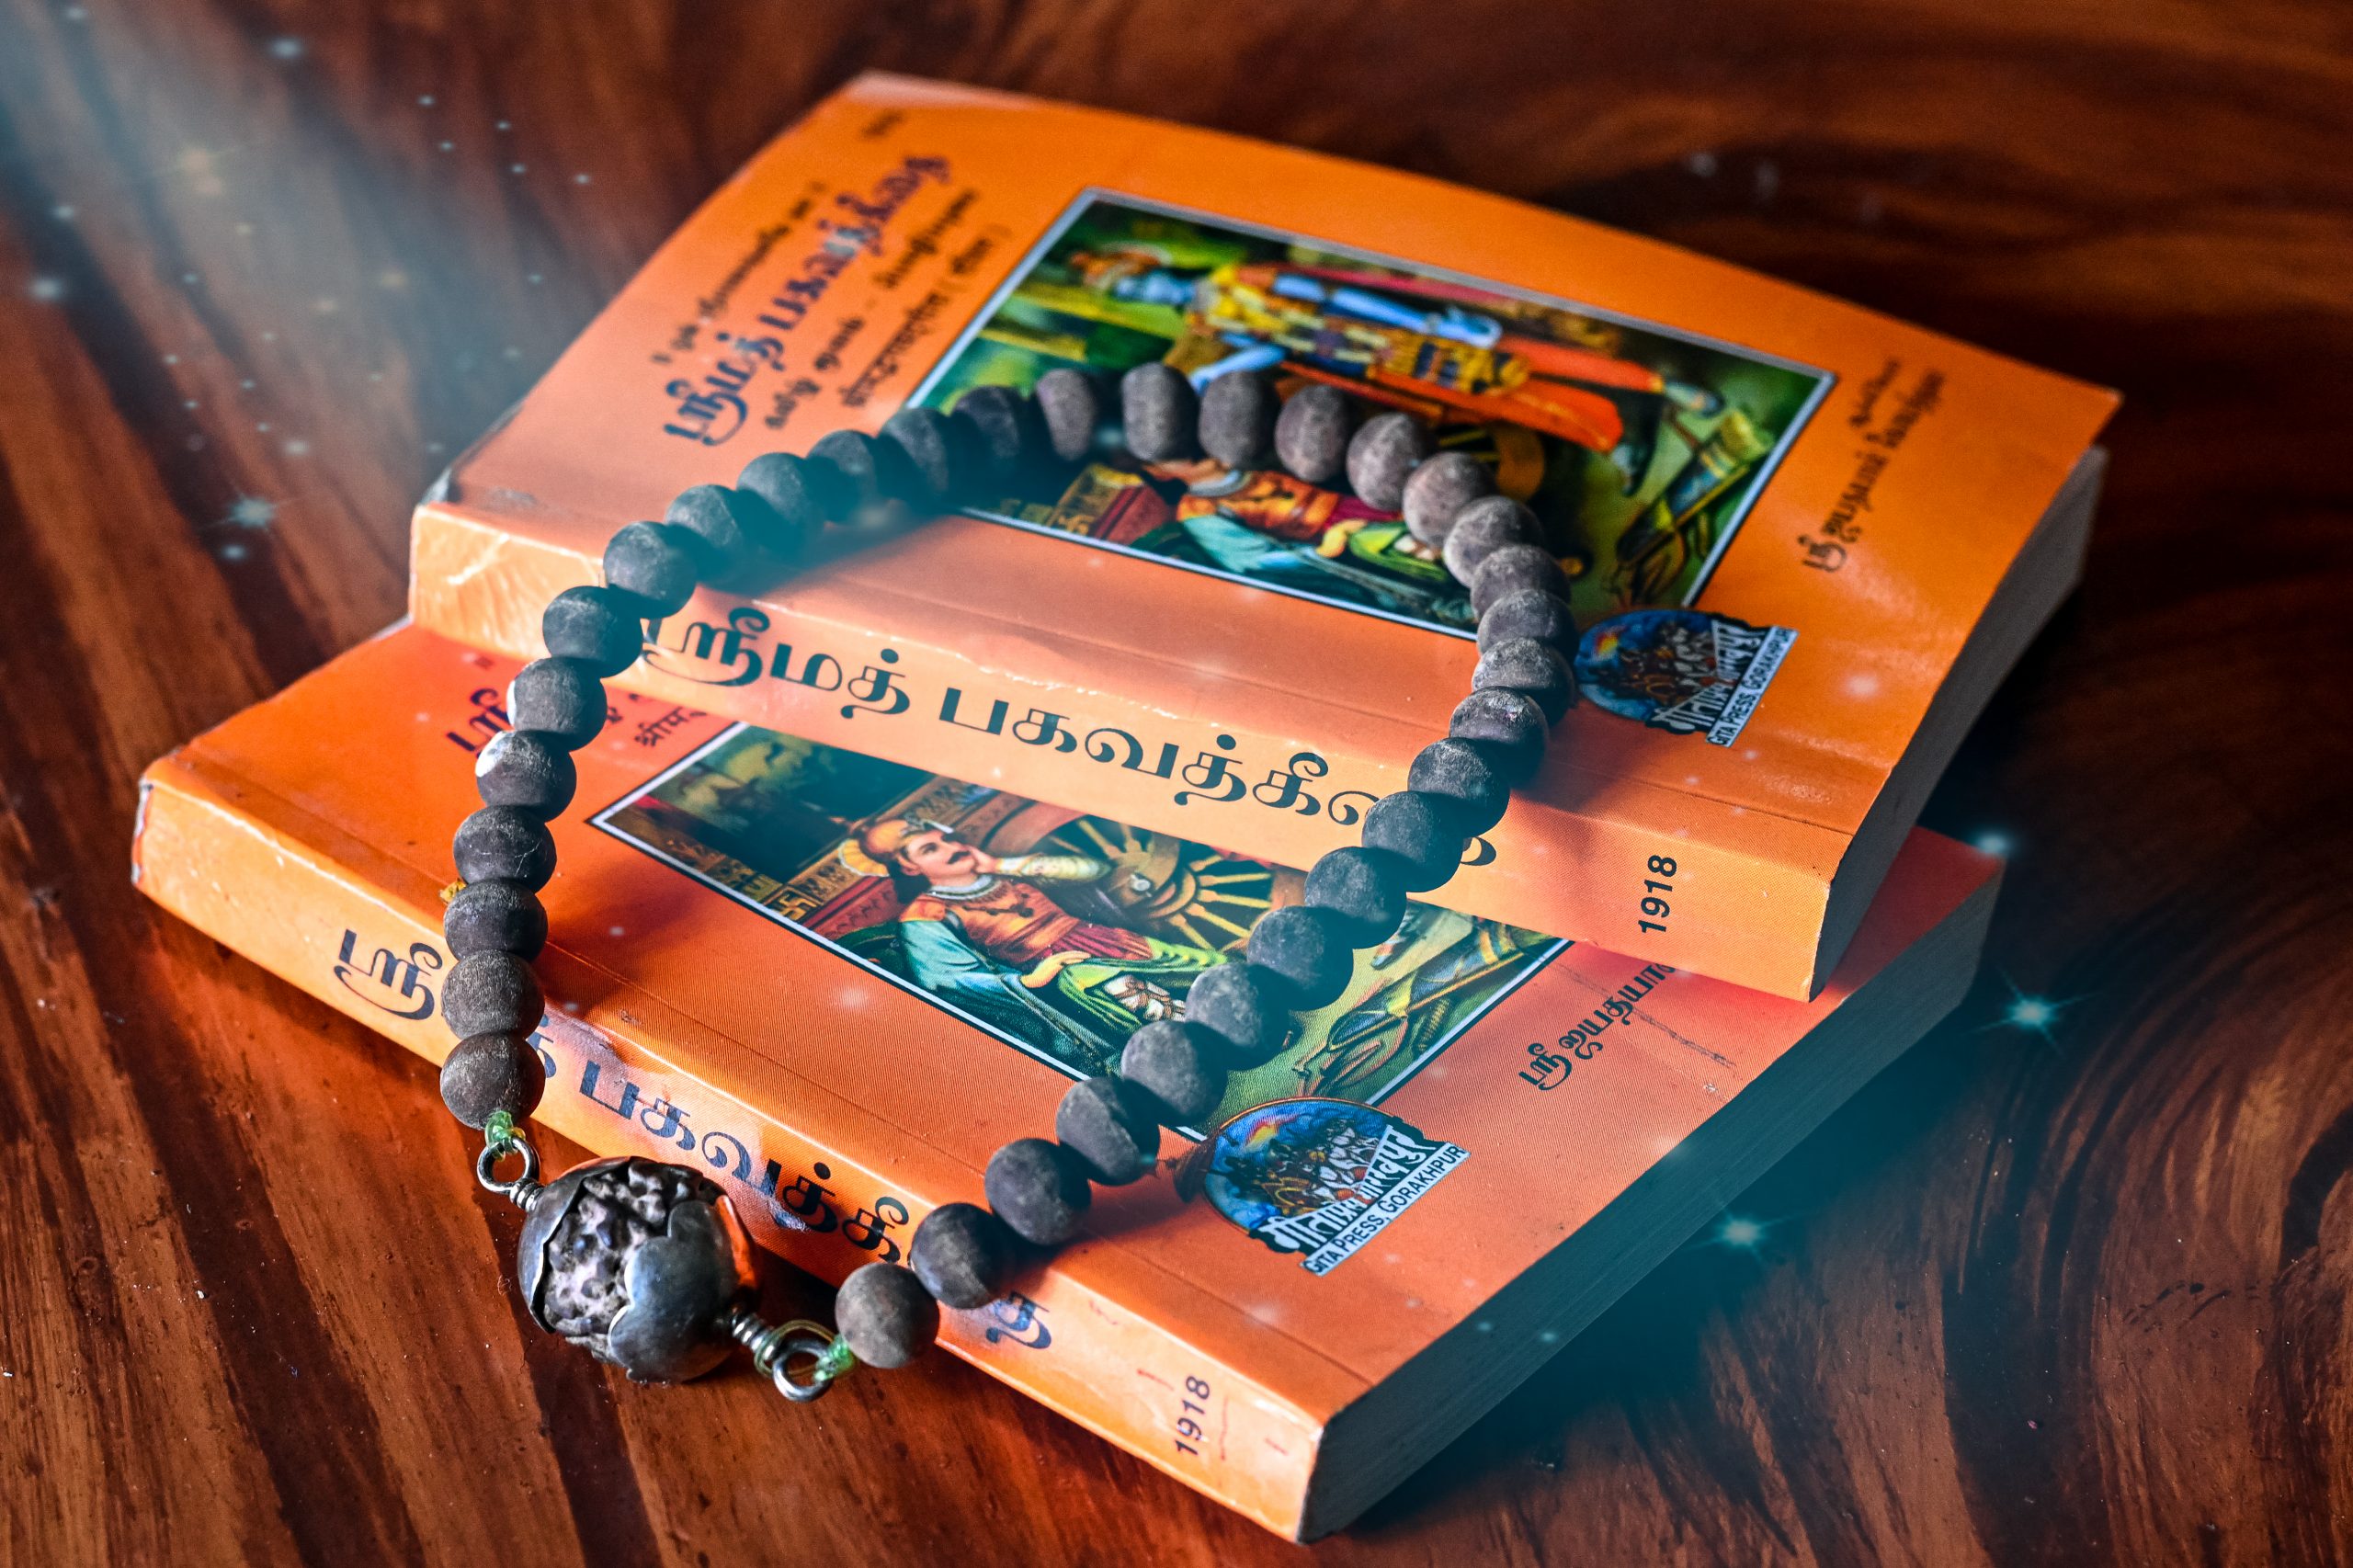 An old bead necklace on a sacred books